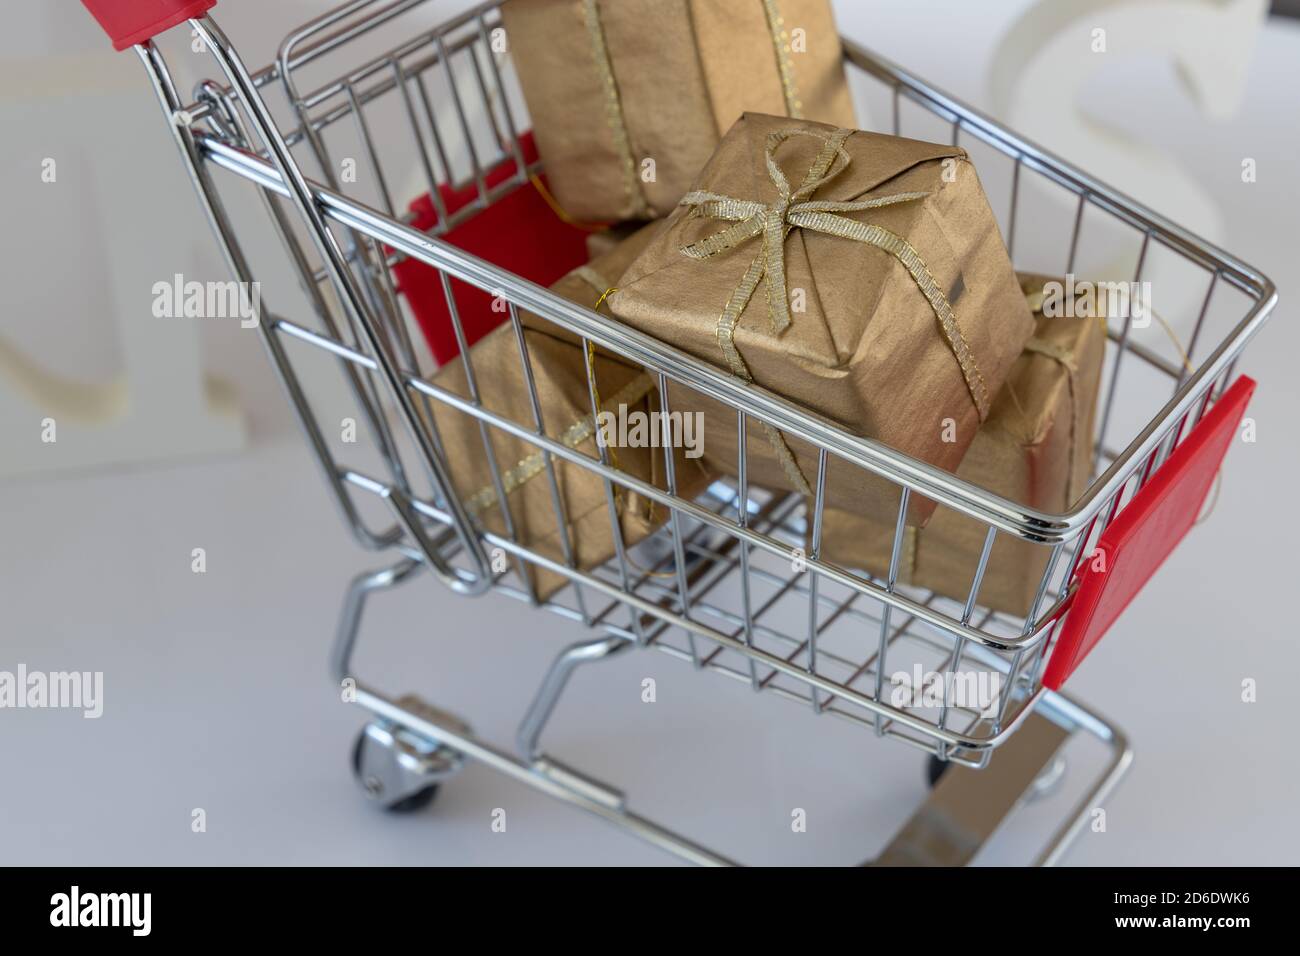 gifts in a little shopping cart as a concept for expensive gifts in christmas time Stock Photo